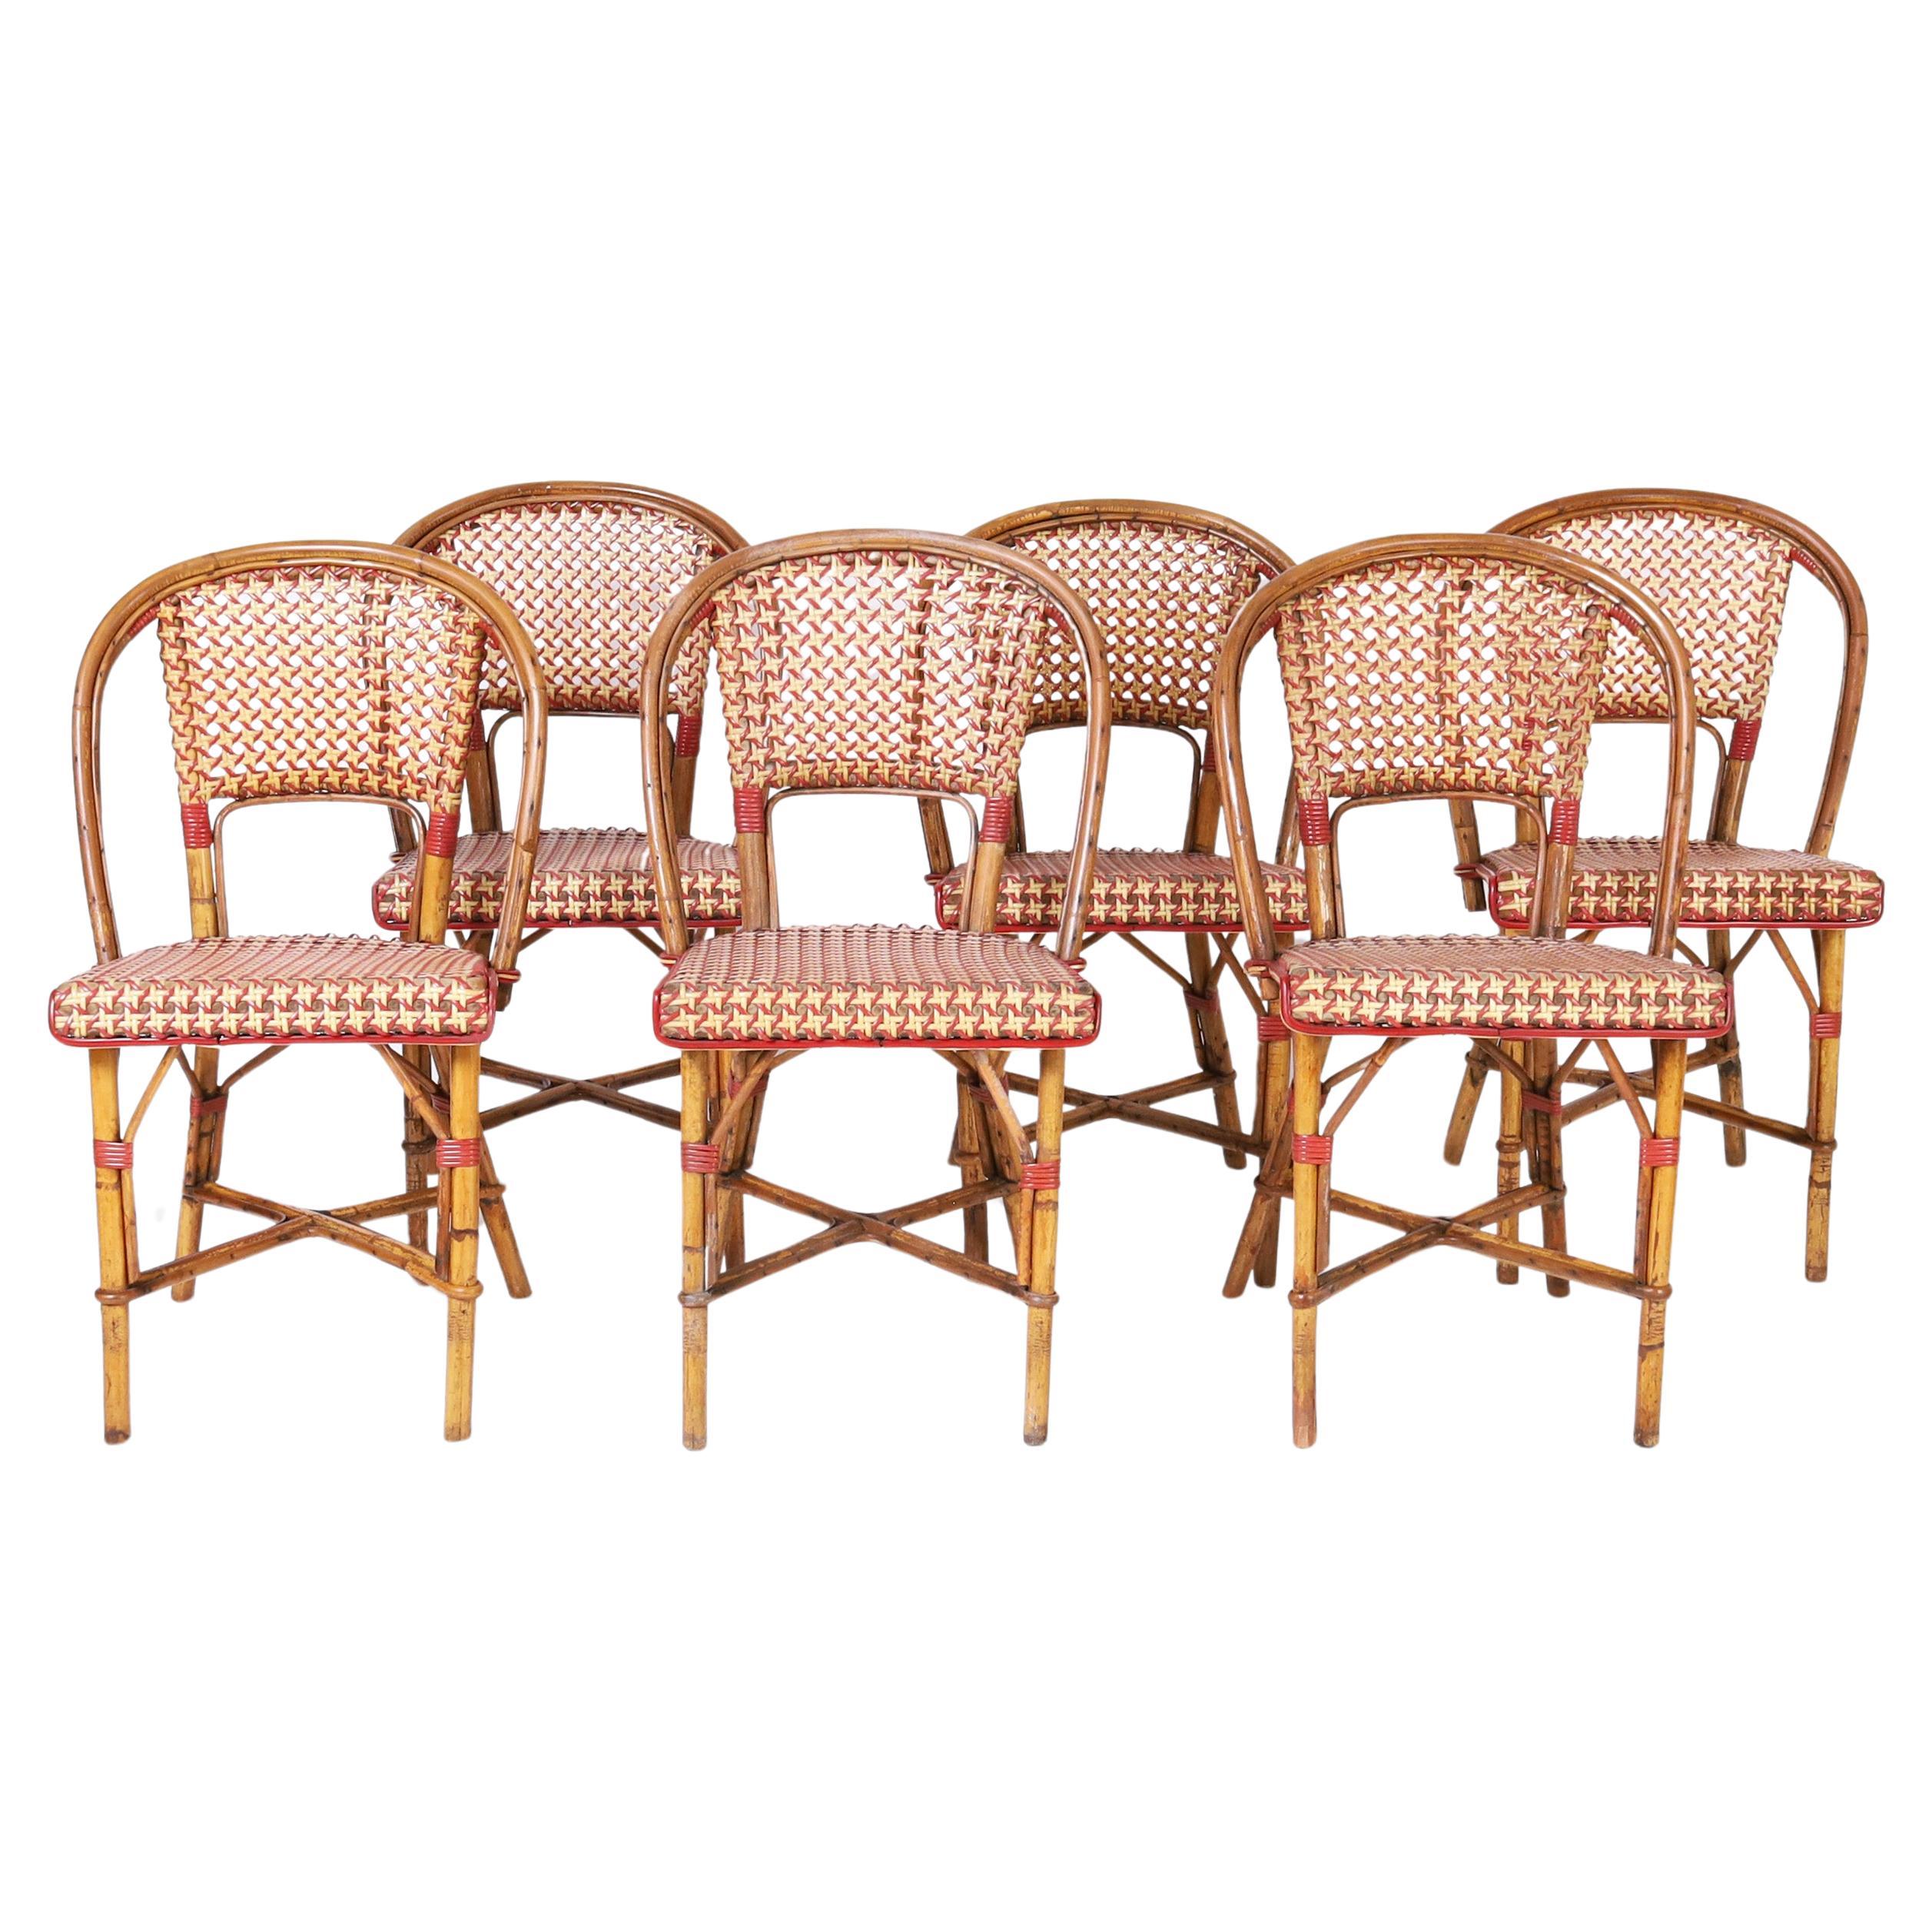 What size are bistro chairs?